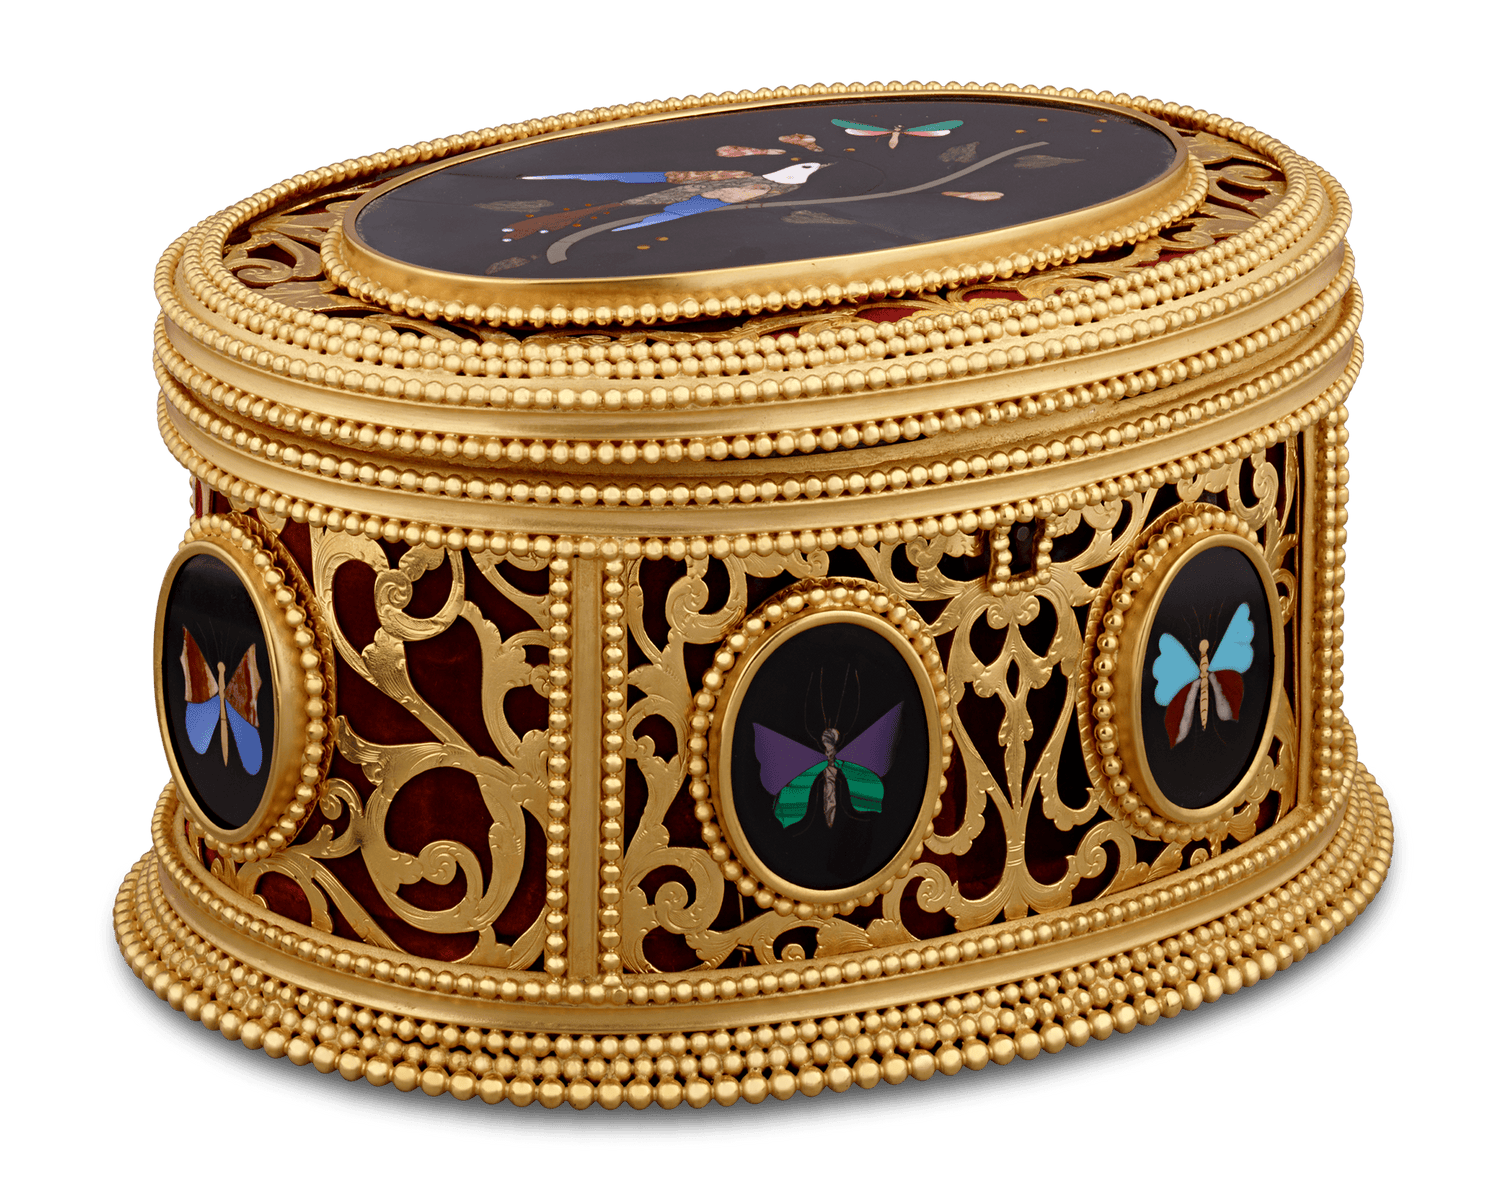 Pietre dure and doré bronze box by Tahan